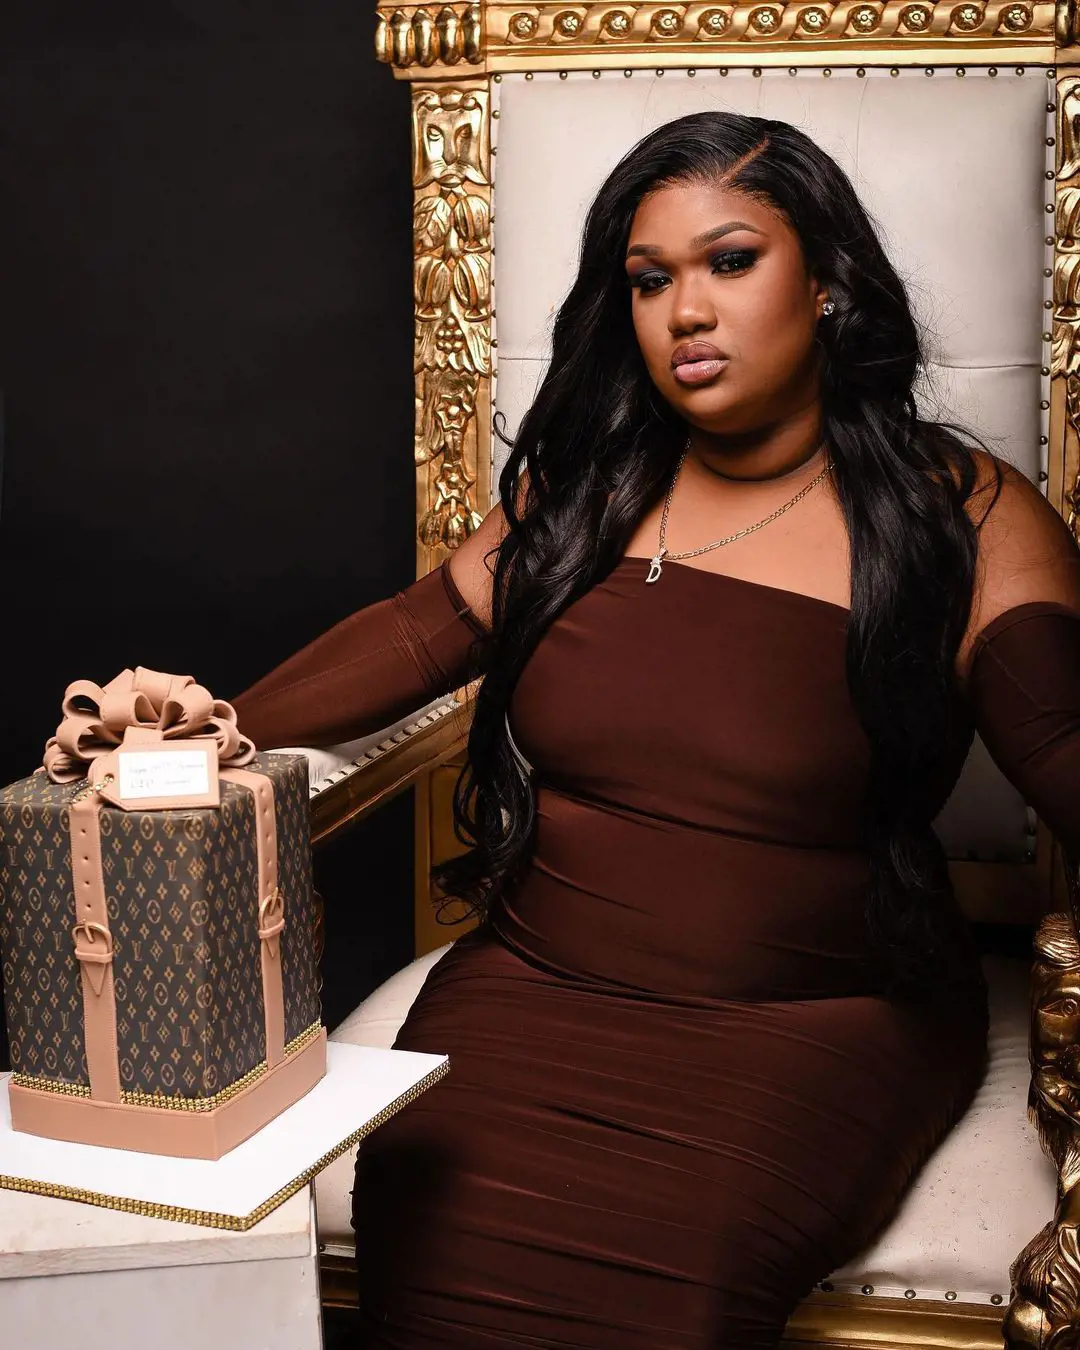 Biggie on her 26th birthday with a Louis Vuitton bag